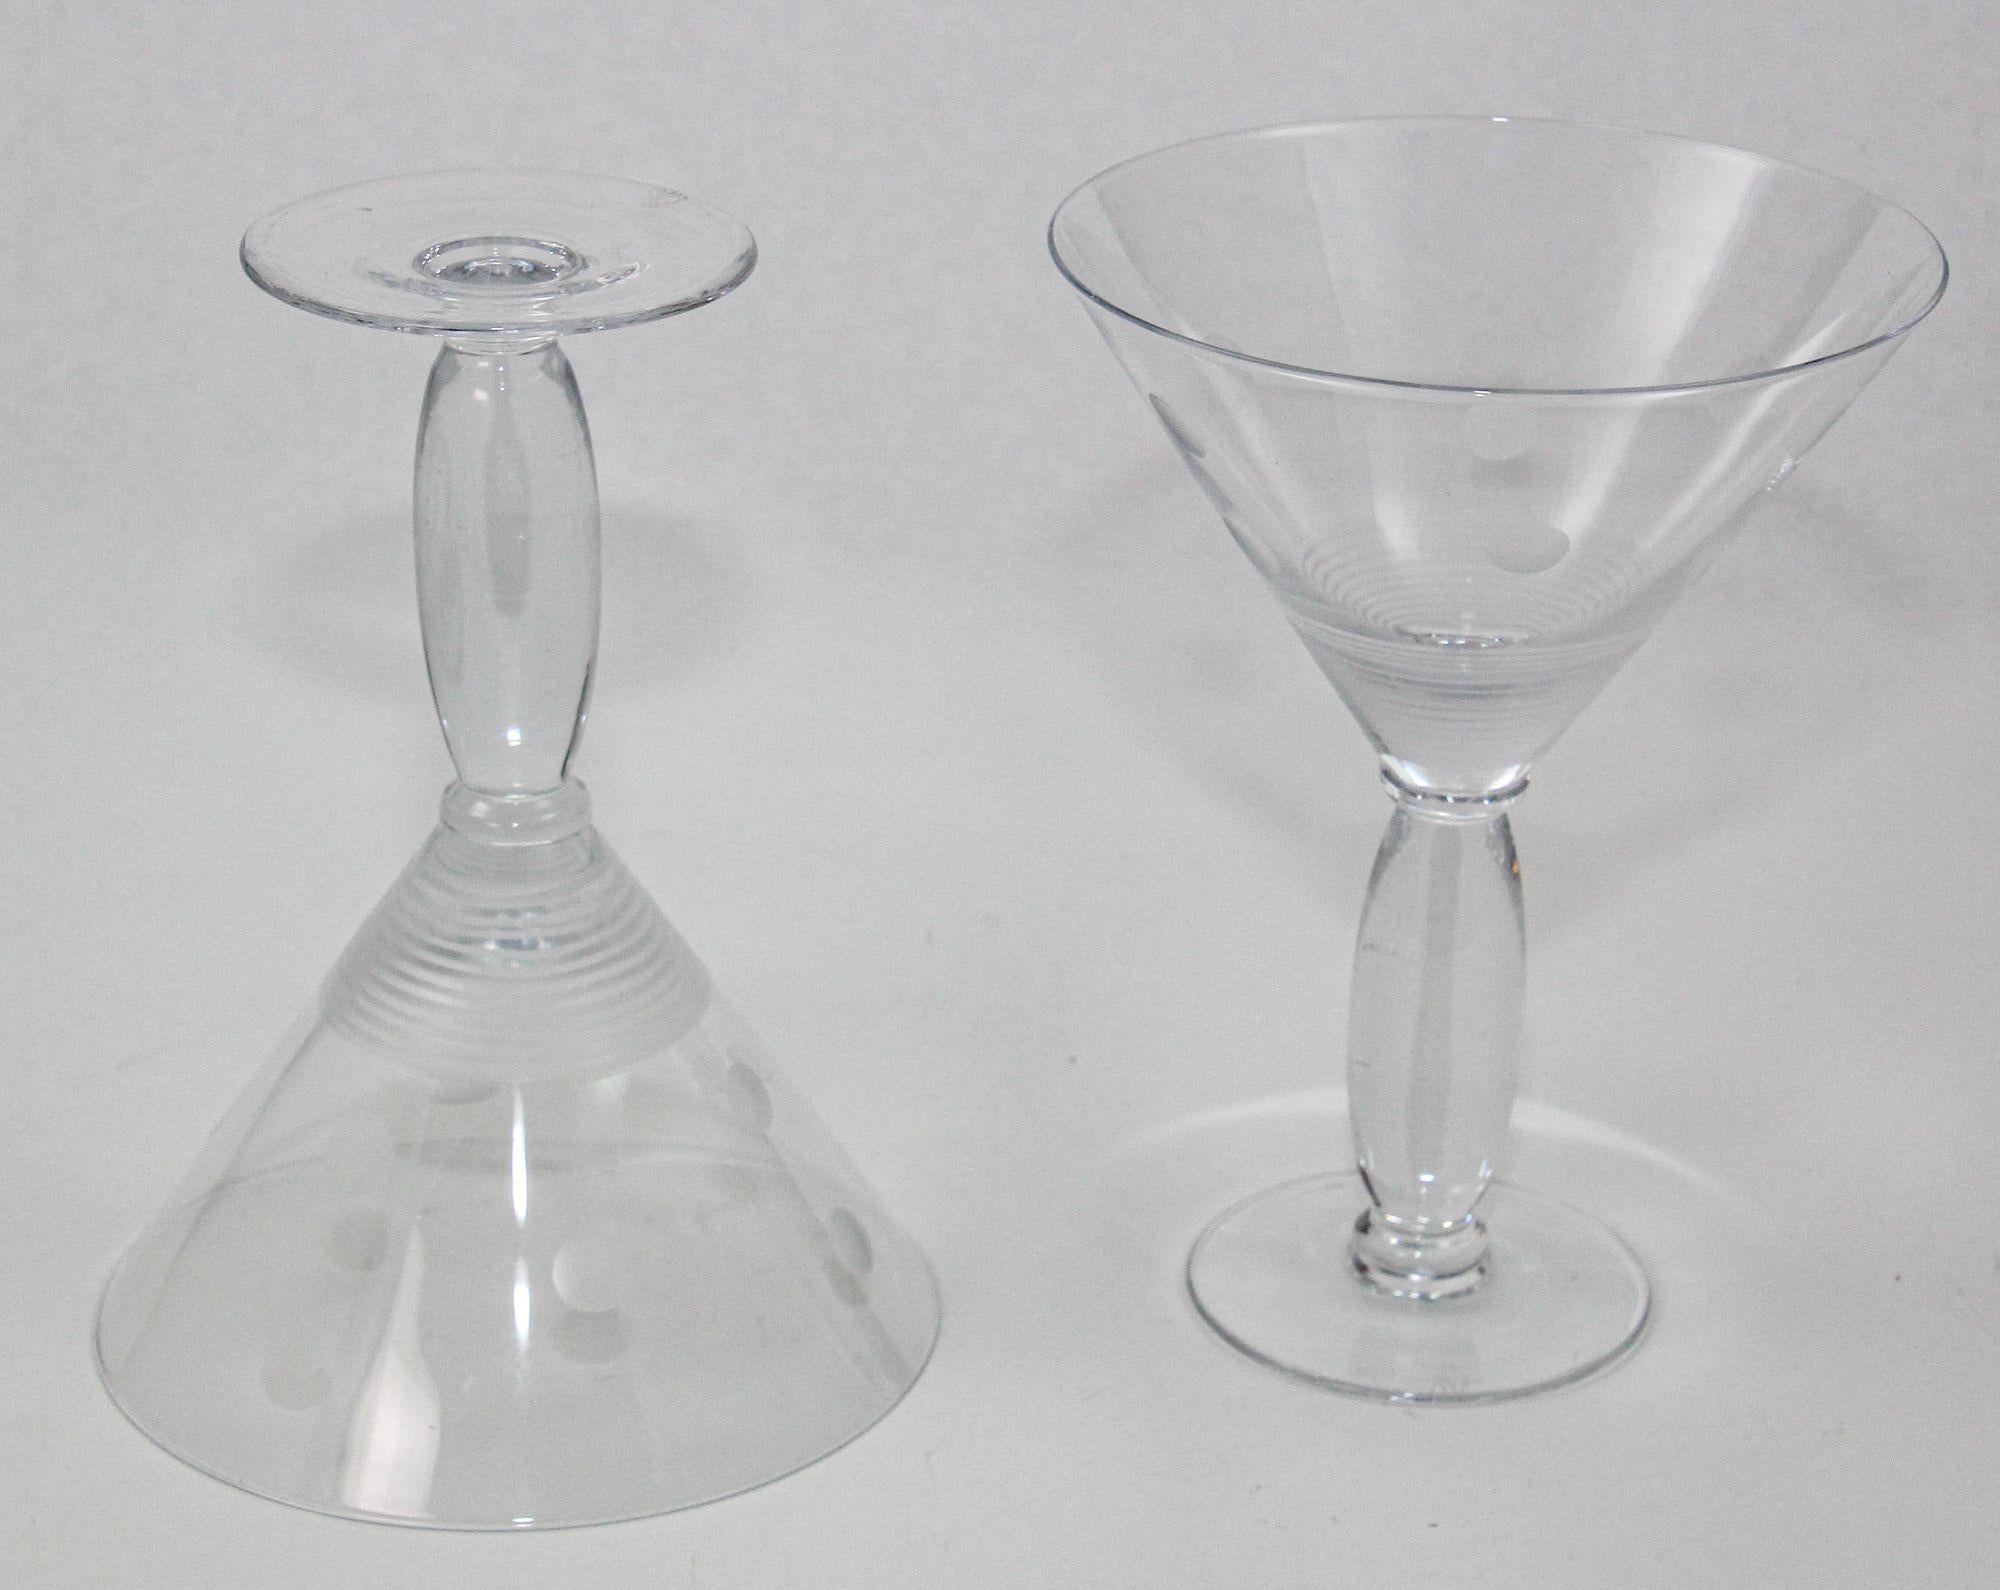 ROYAL DOULTON Martini Crystal Etched Glasses Set of 2 Vintage Cocktail Barware In Good Condition For Sale In North Hollywood, CA